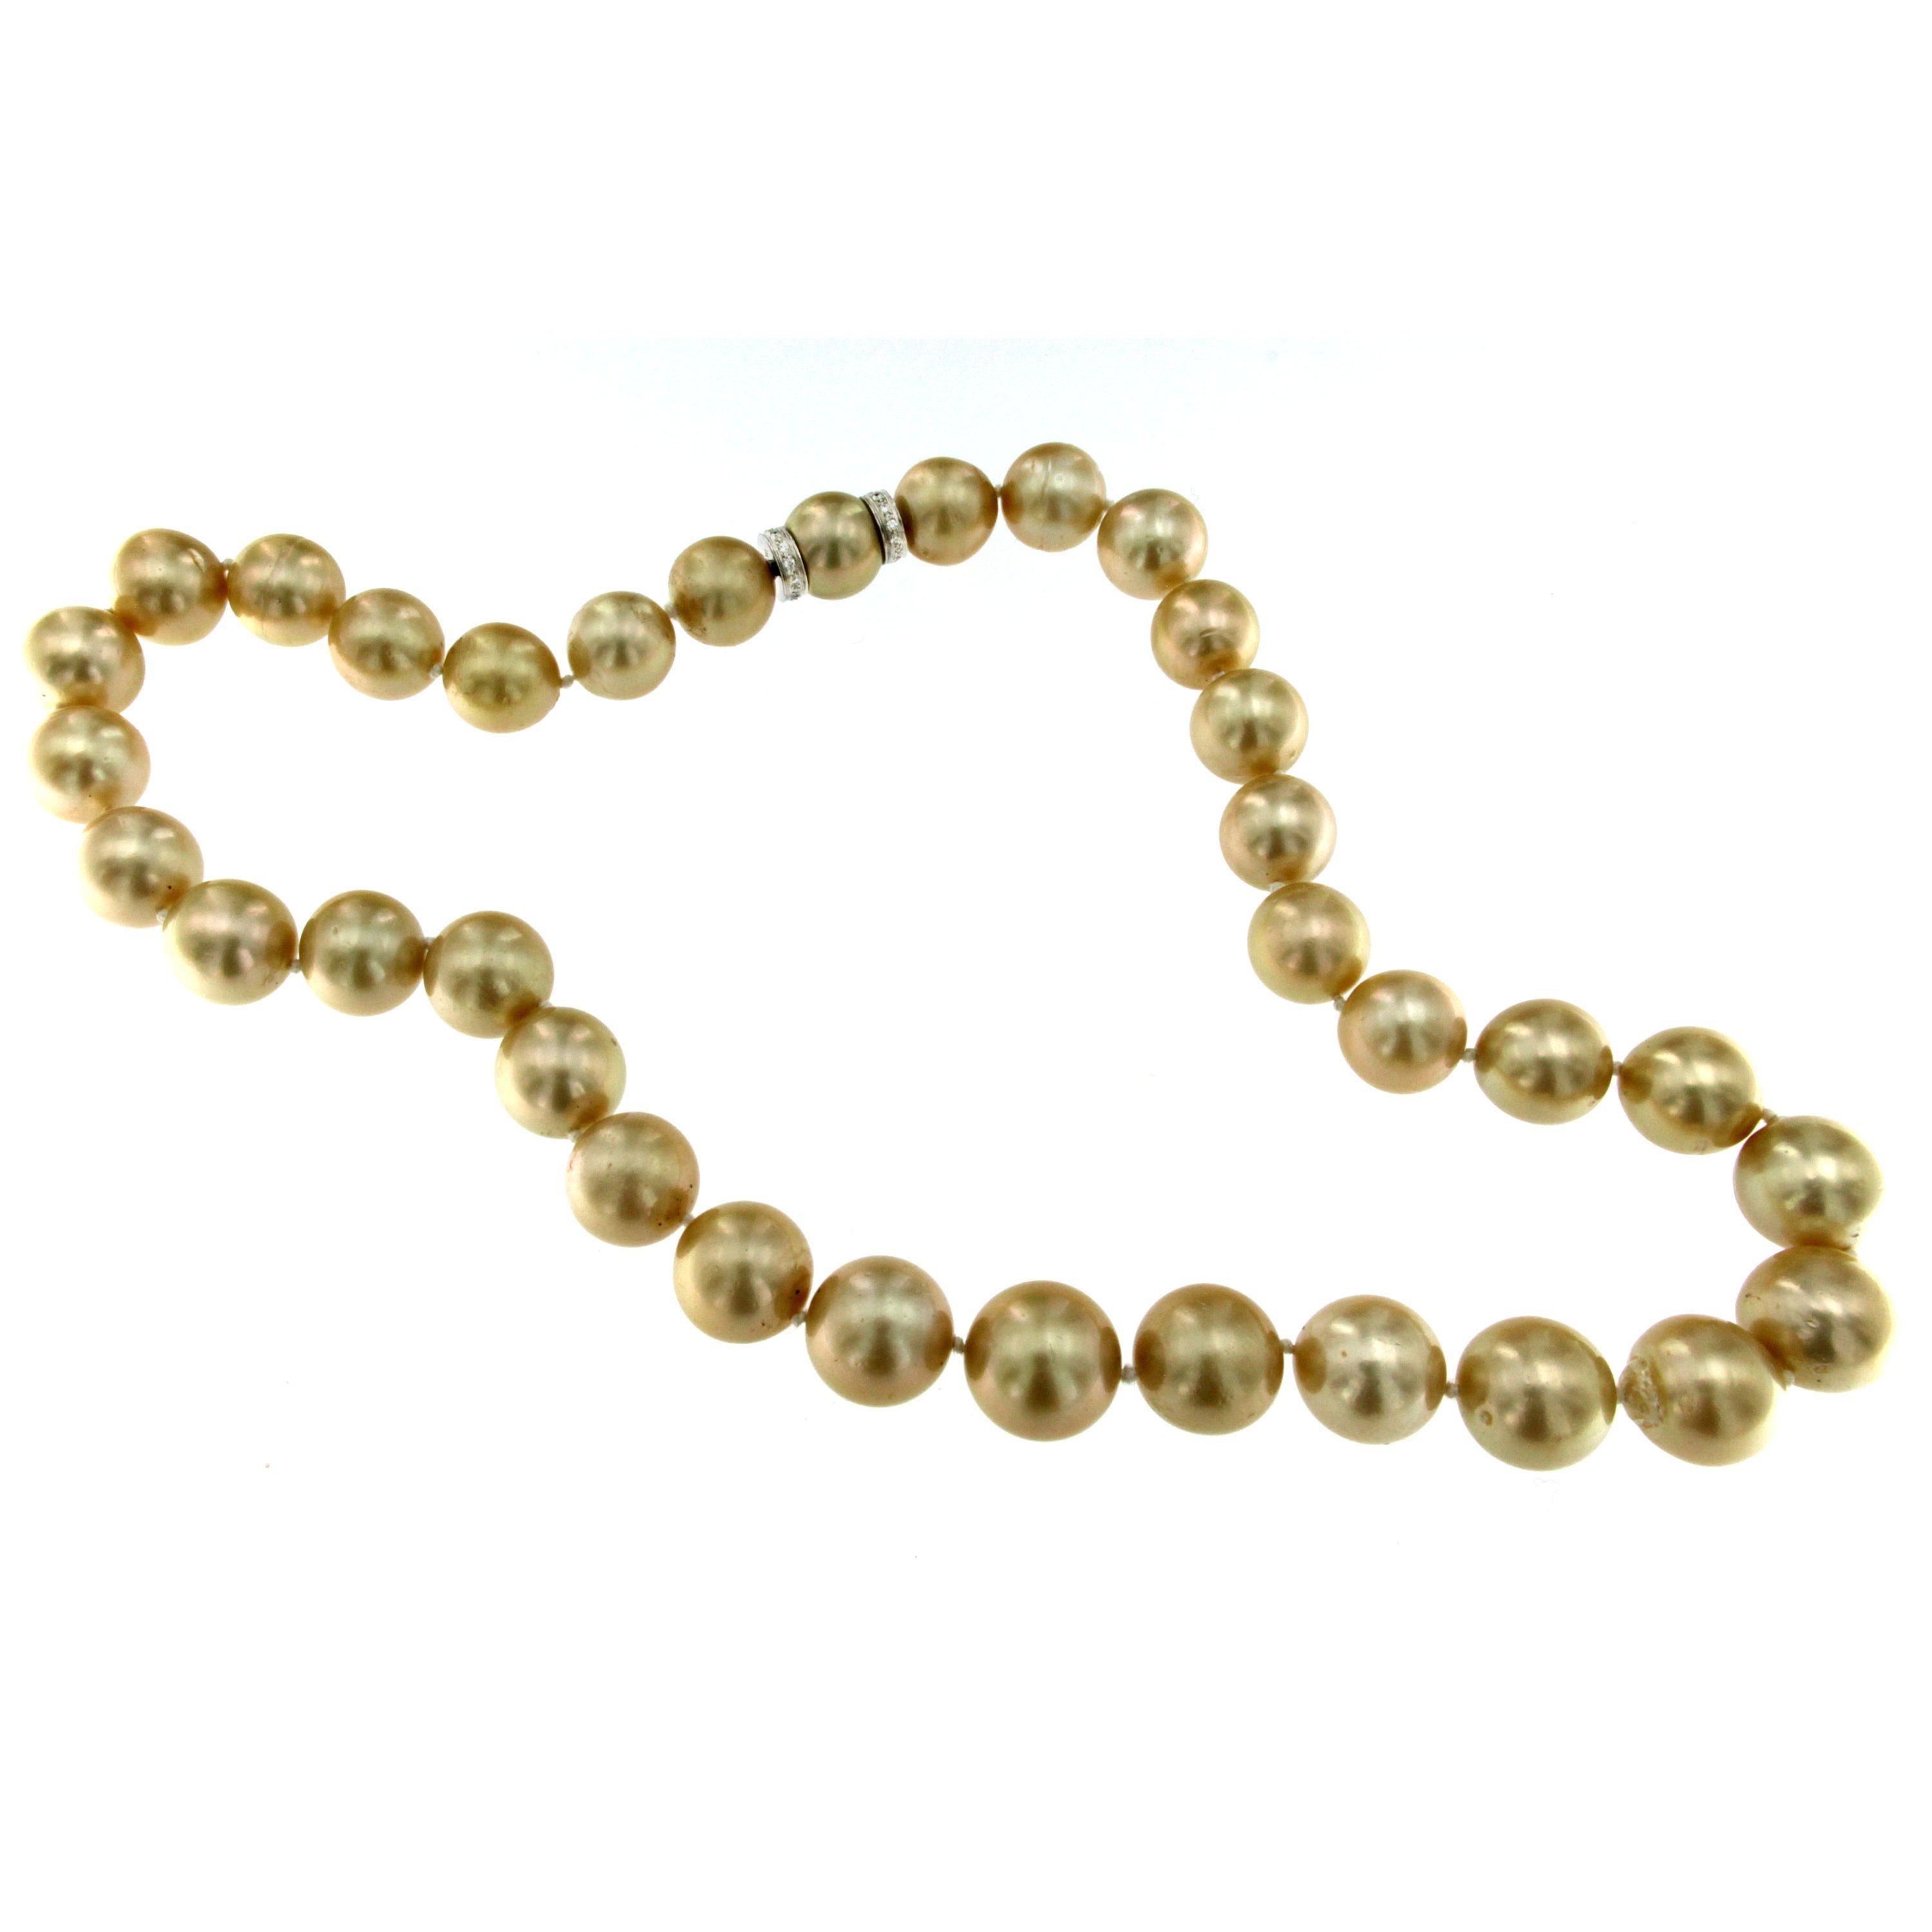 One of the most Beautiful and large Golden South Sea pearl necklace we've ever had for sale, this strand includes 12-14 millimeter pearls strung on a knotted silk thread and fasten with a gorgeous pearl diamond clasp. This strand is an heirloom